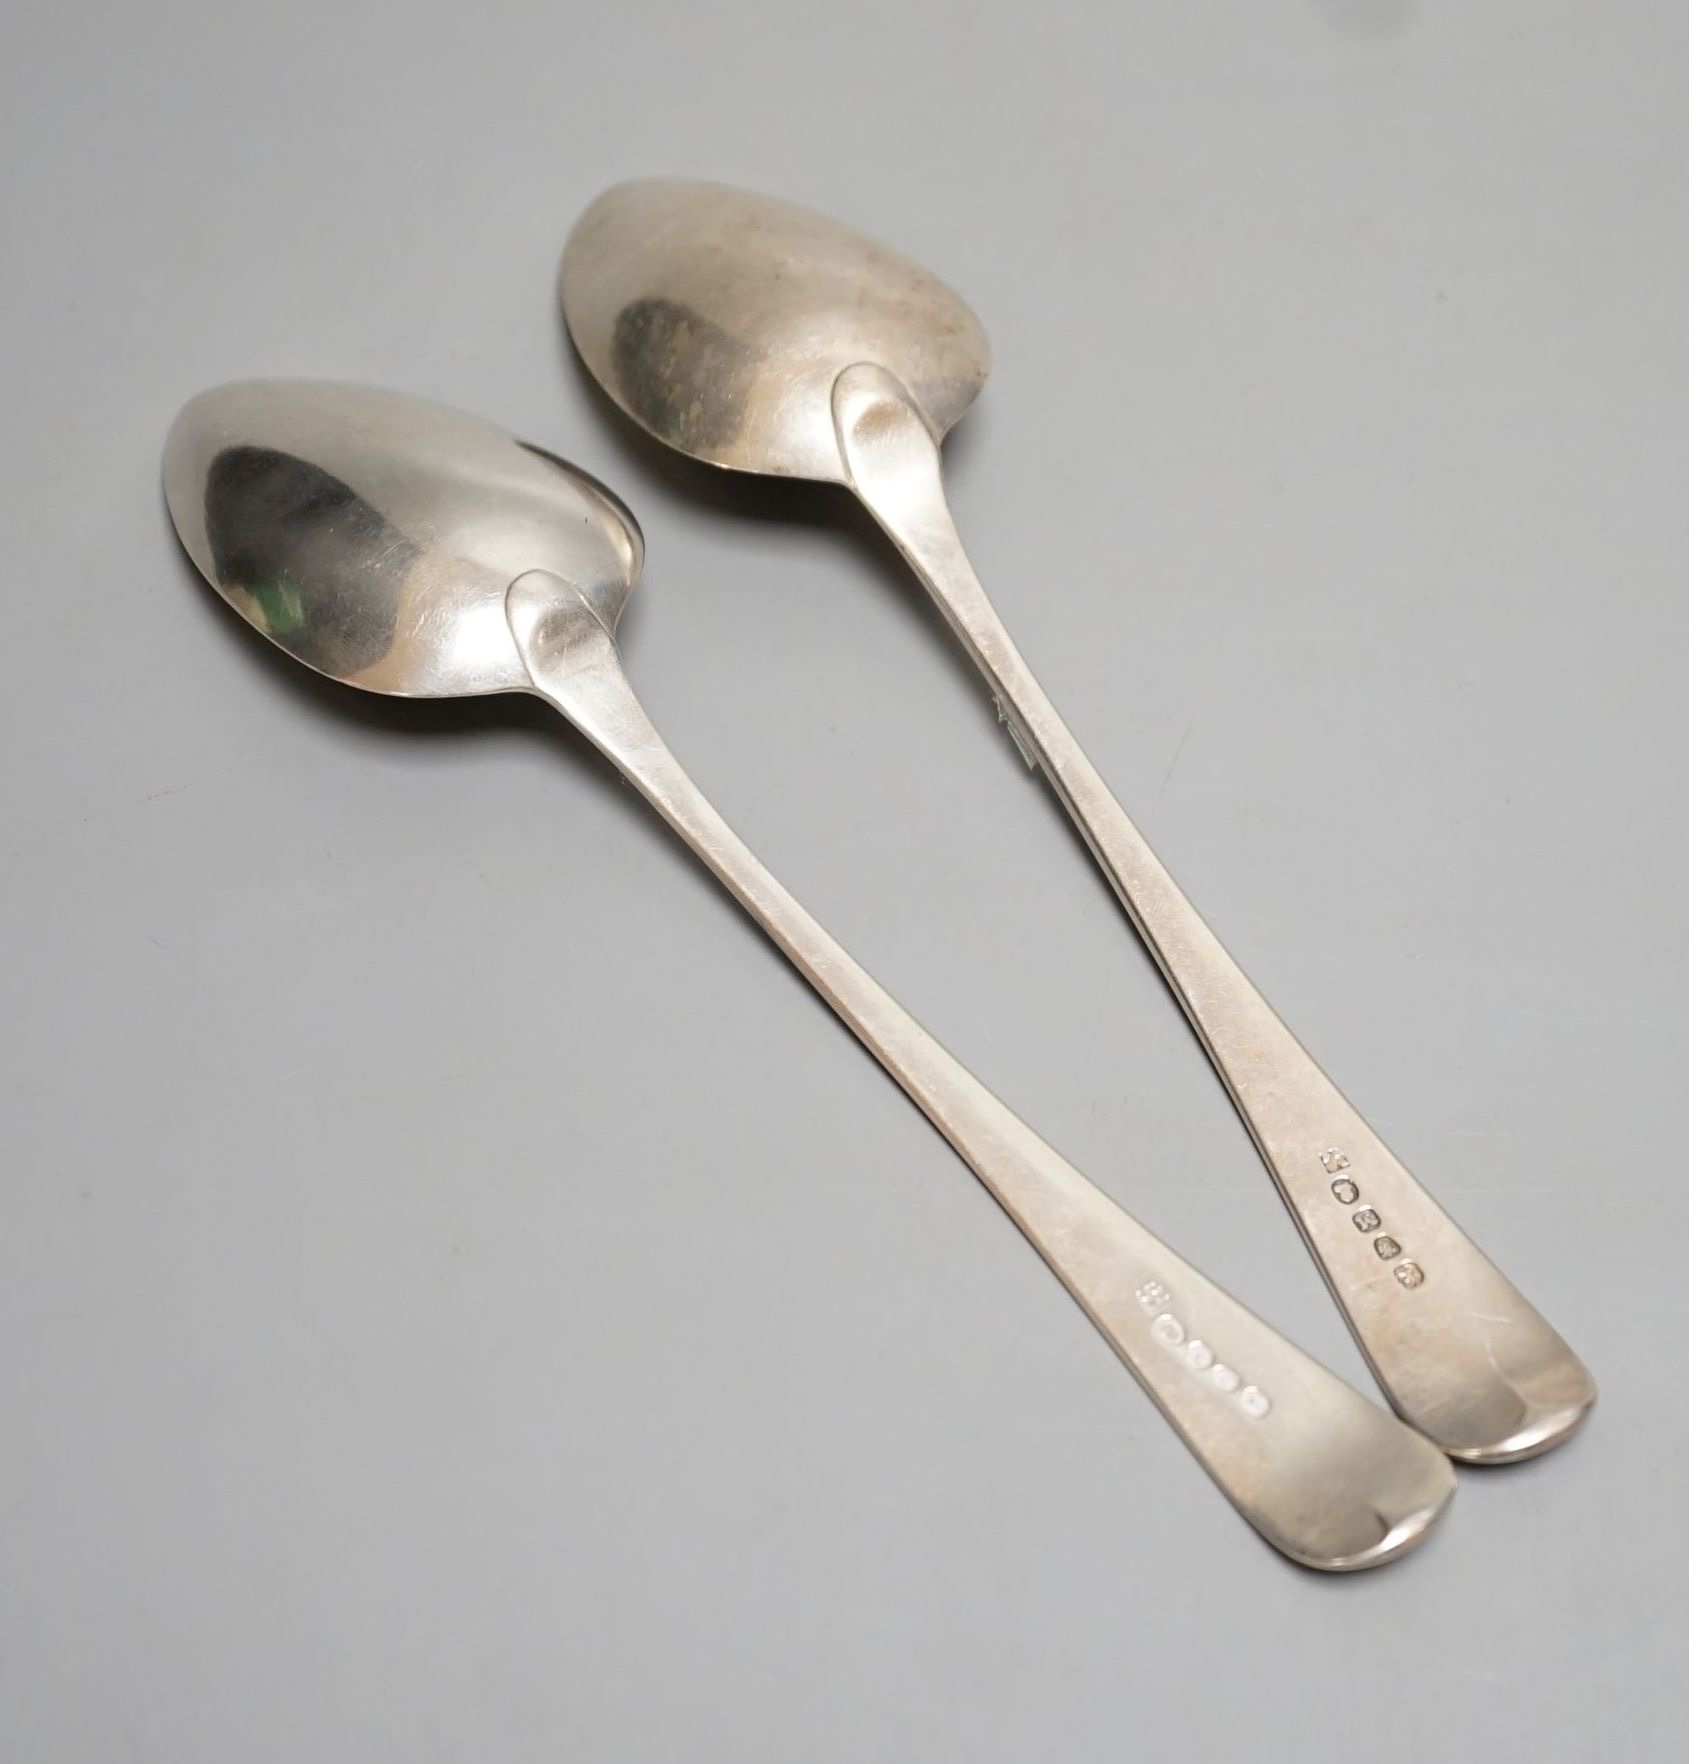 A pair of George III silver Old English pattern tablespoons, Peter & William Bateman, London, 1807, 4oz, with engraved initial.